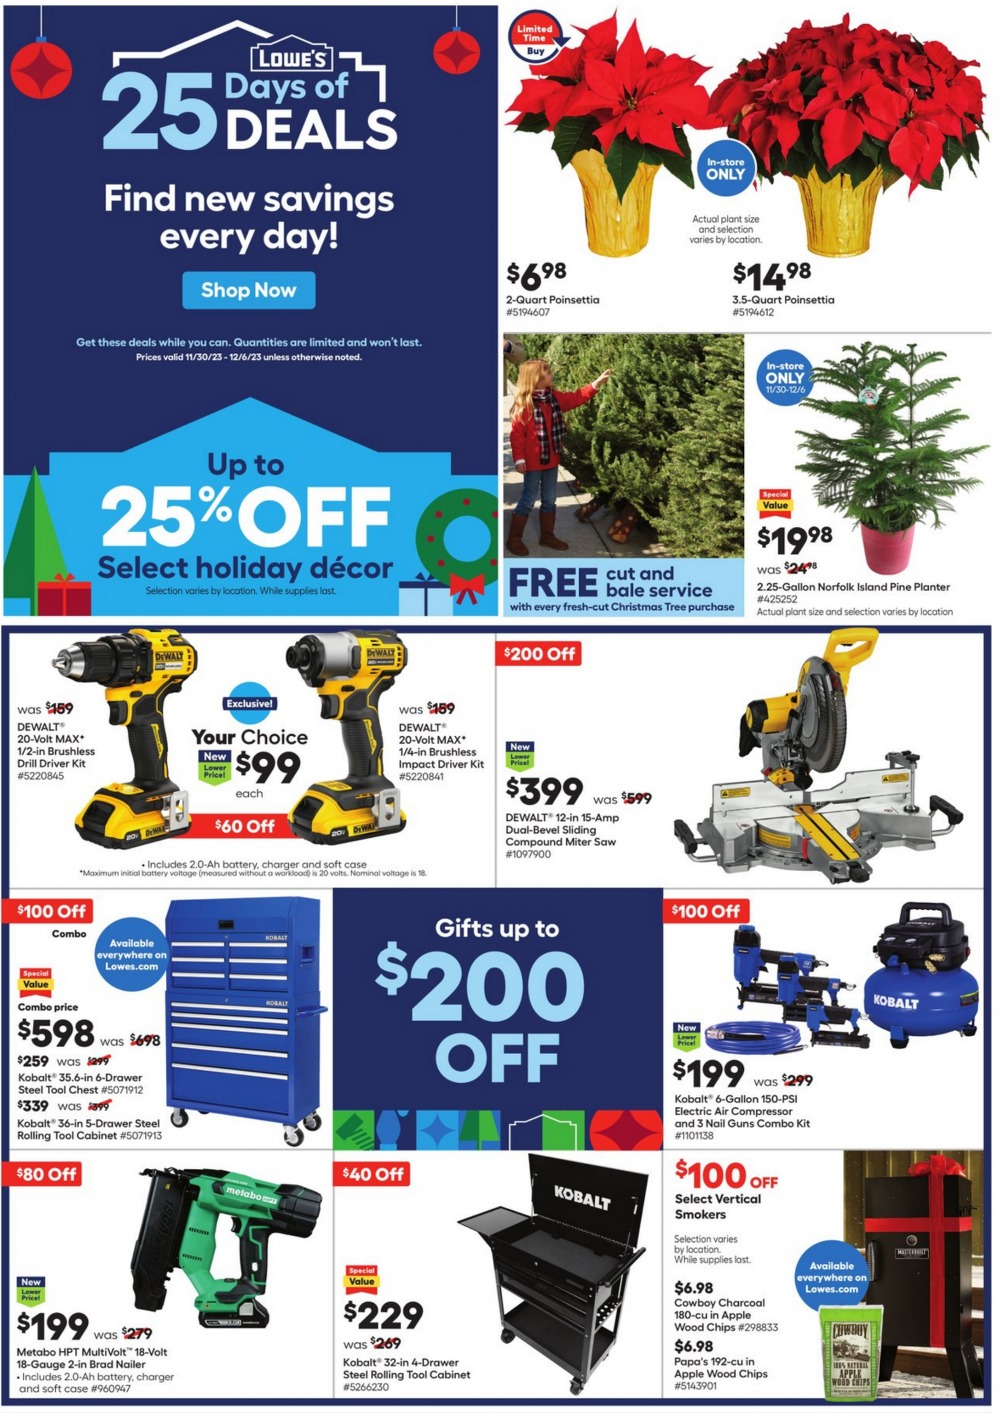 Lowe's Weekly Ad November 30 to December 6, 2023 1 – lowes ad 1